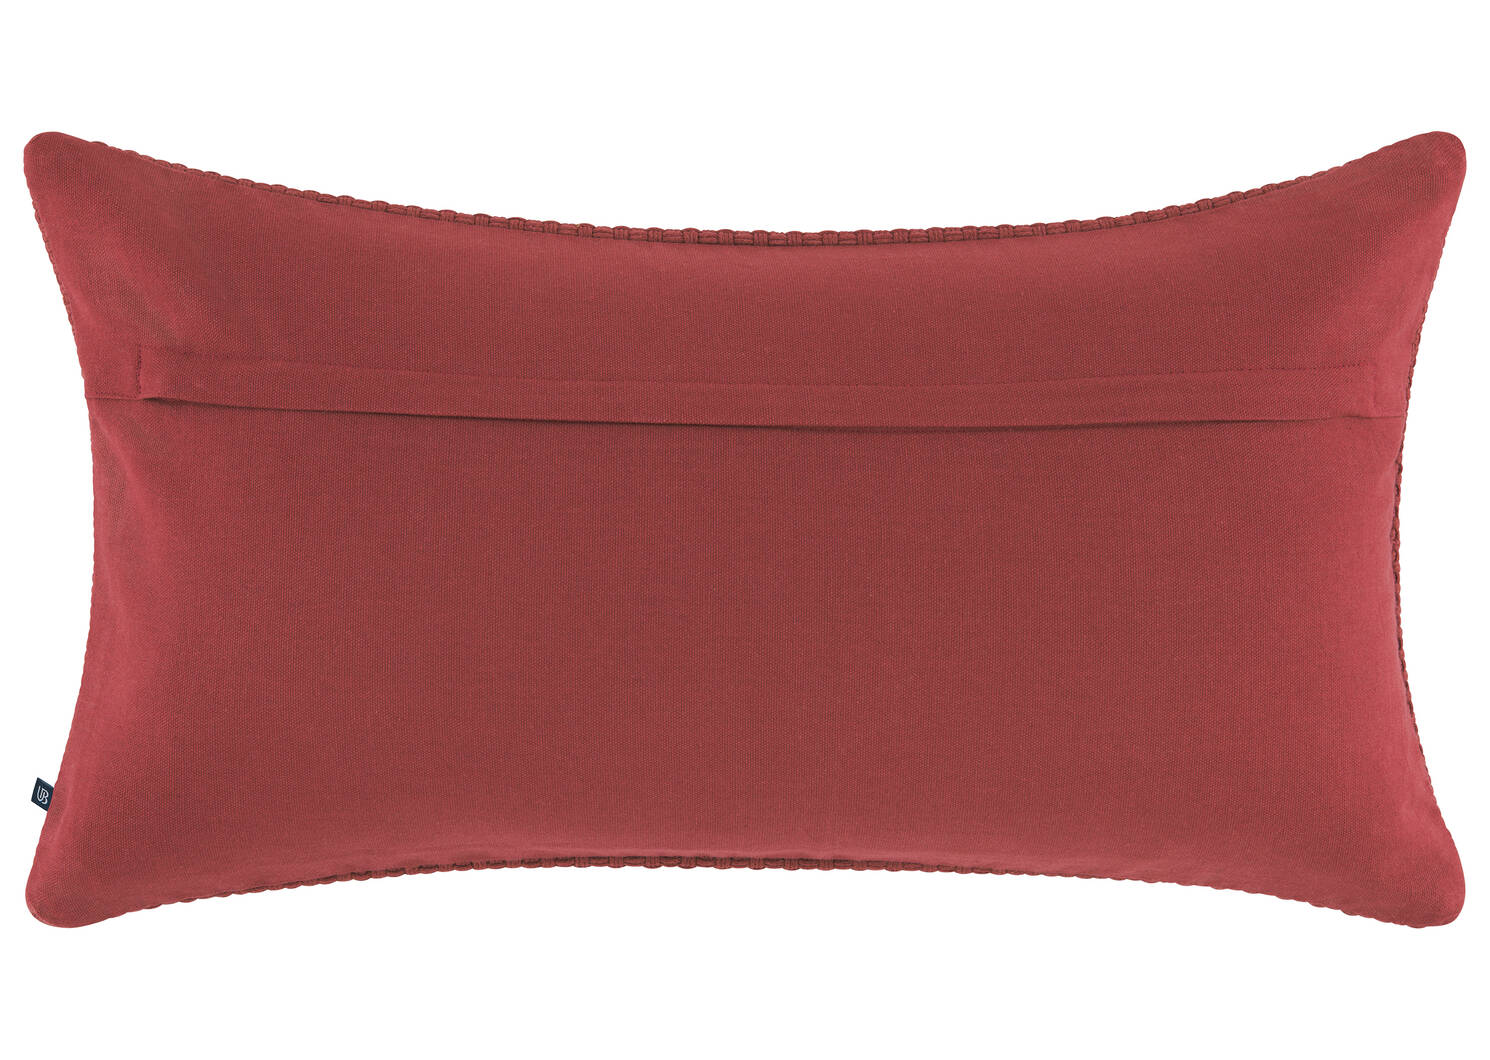 Camber Cotton Pillow 12x22 Wine